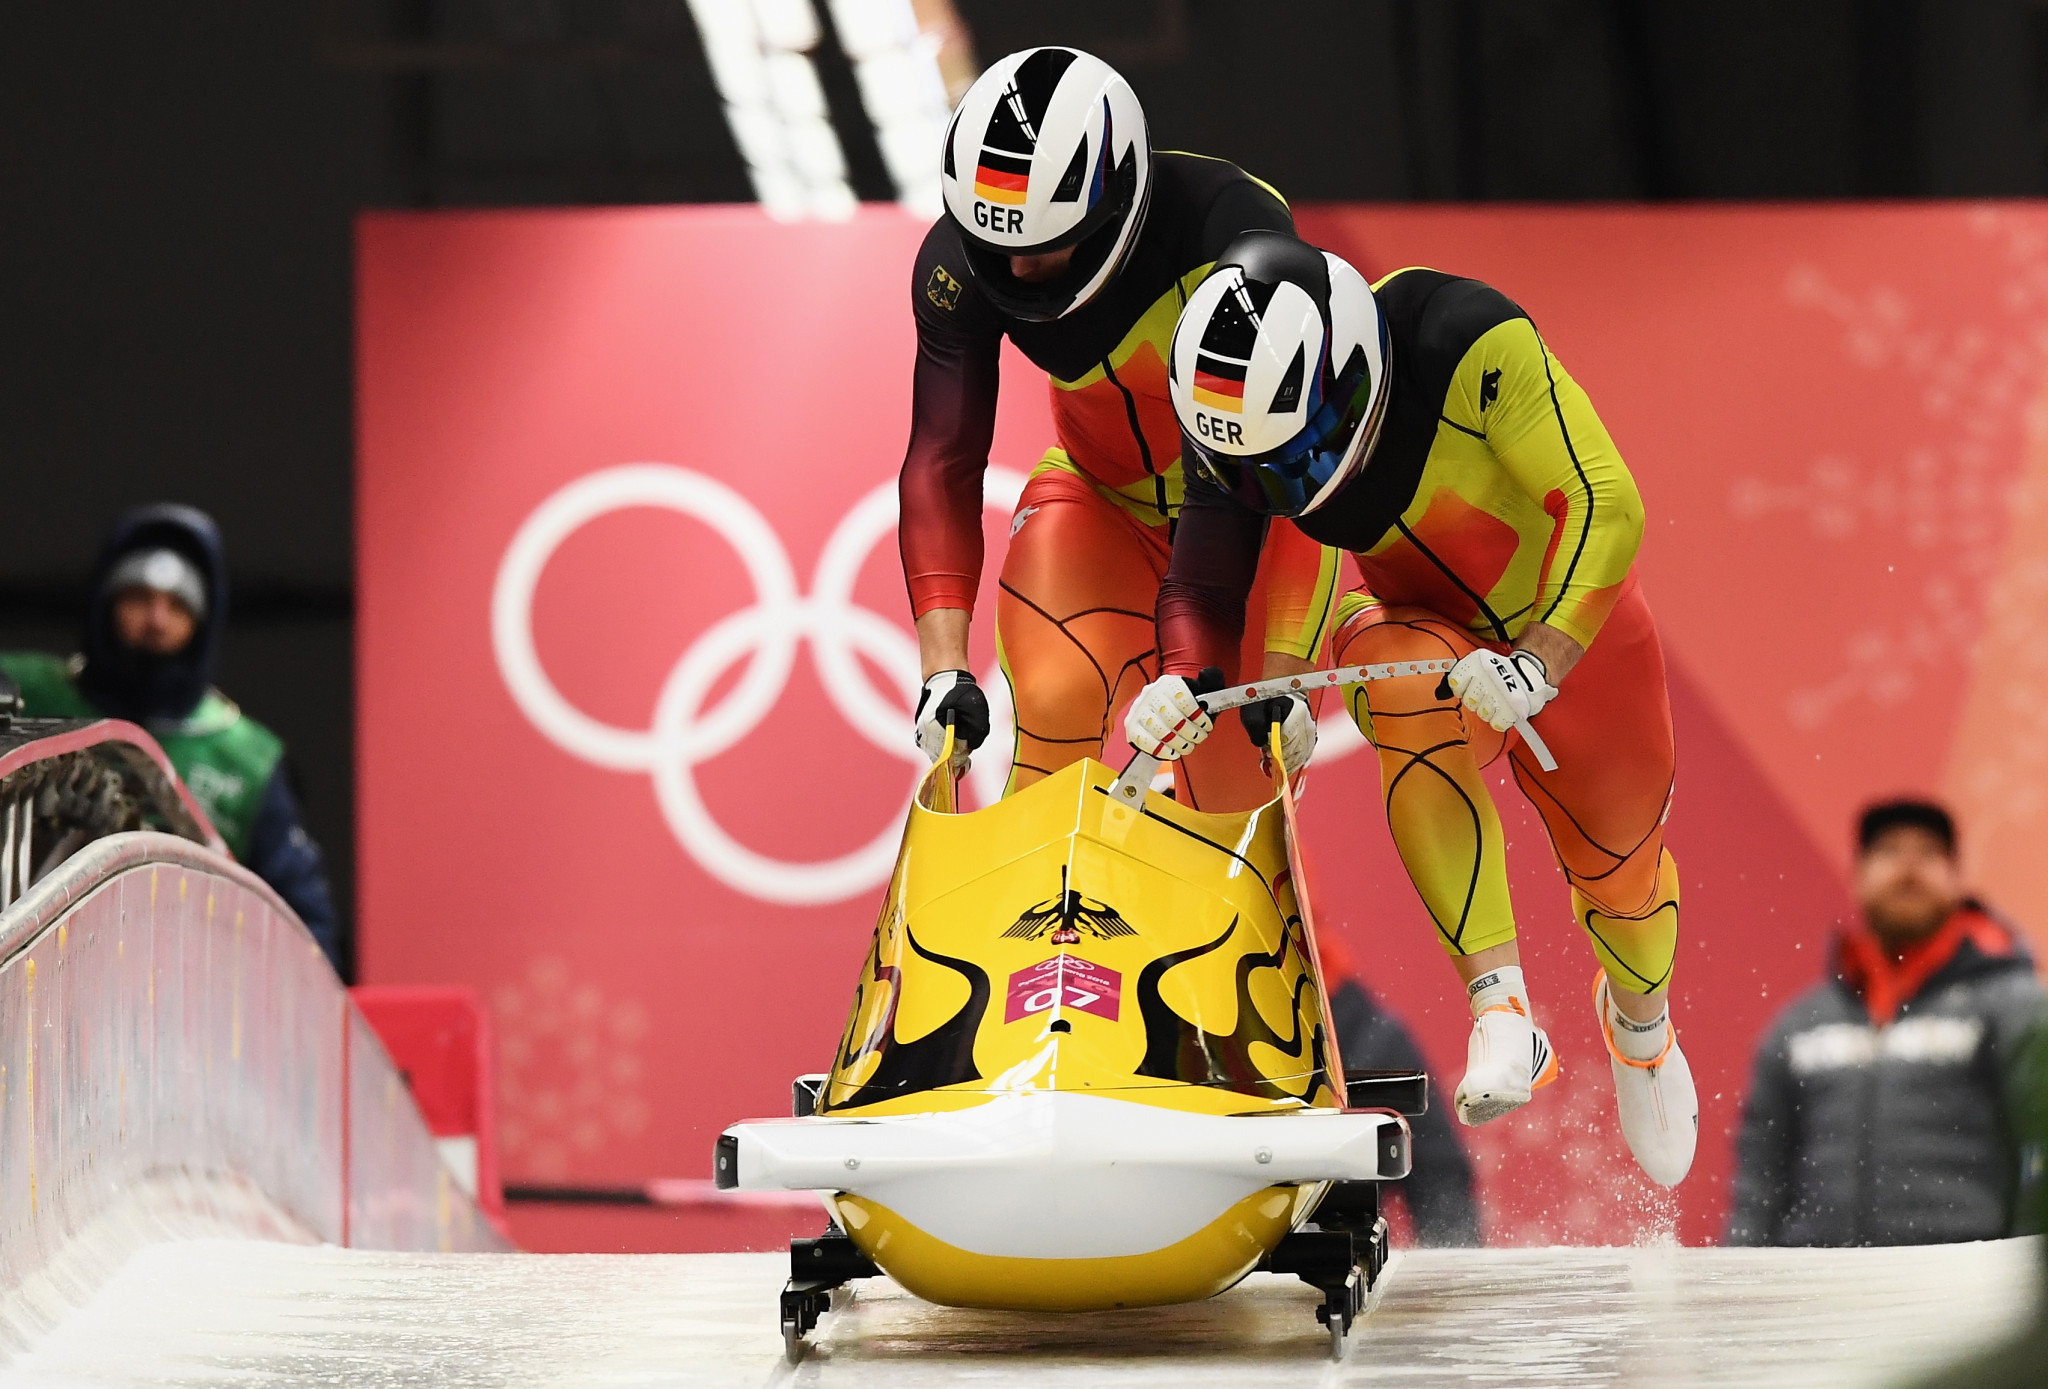 Car manufacturer BMW are developing a two-man bobsleigh prototype for the German team ©Getty Images